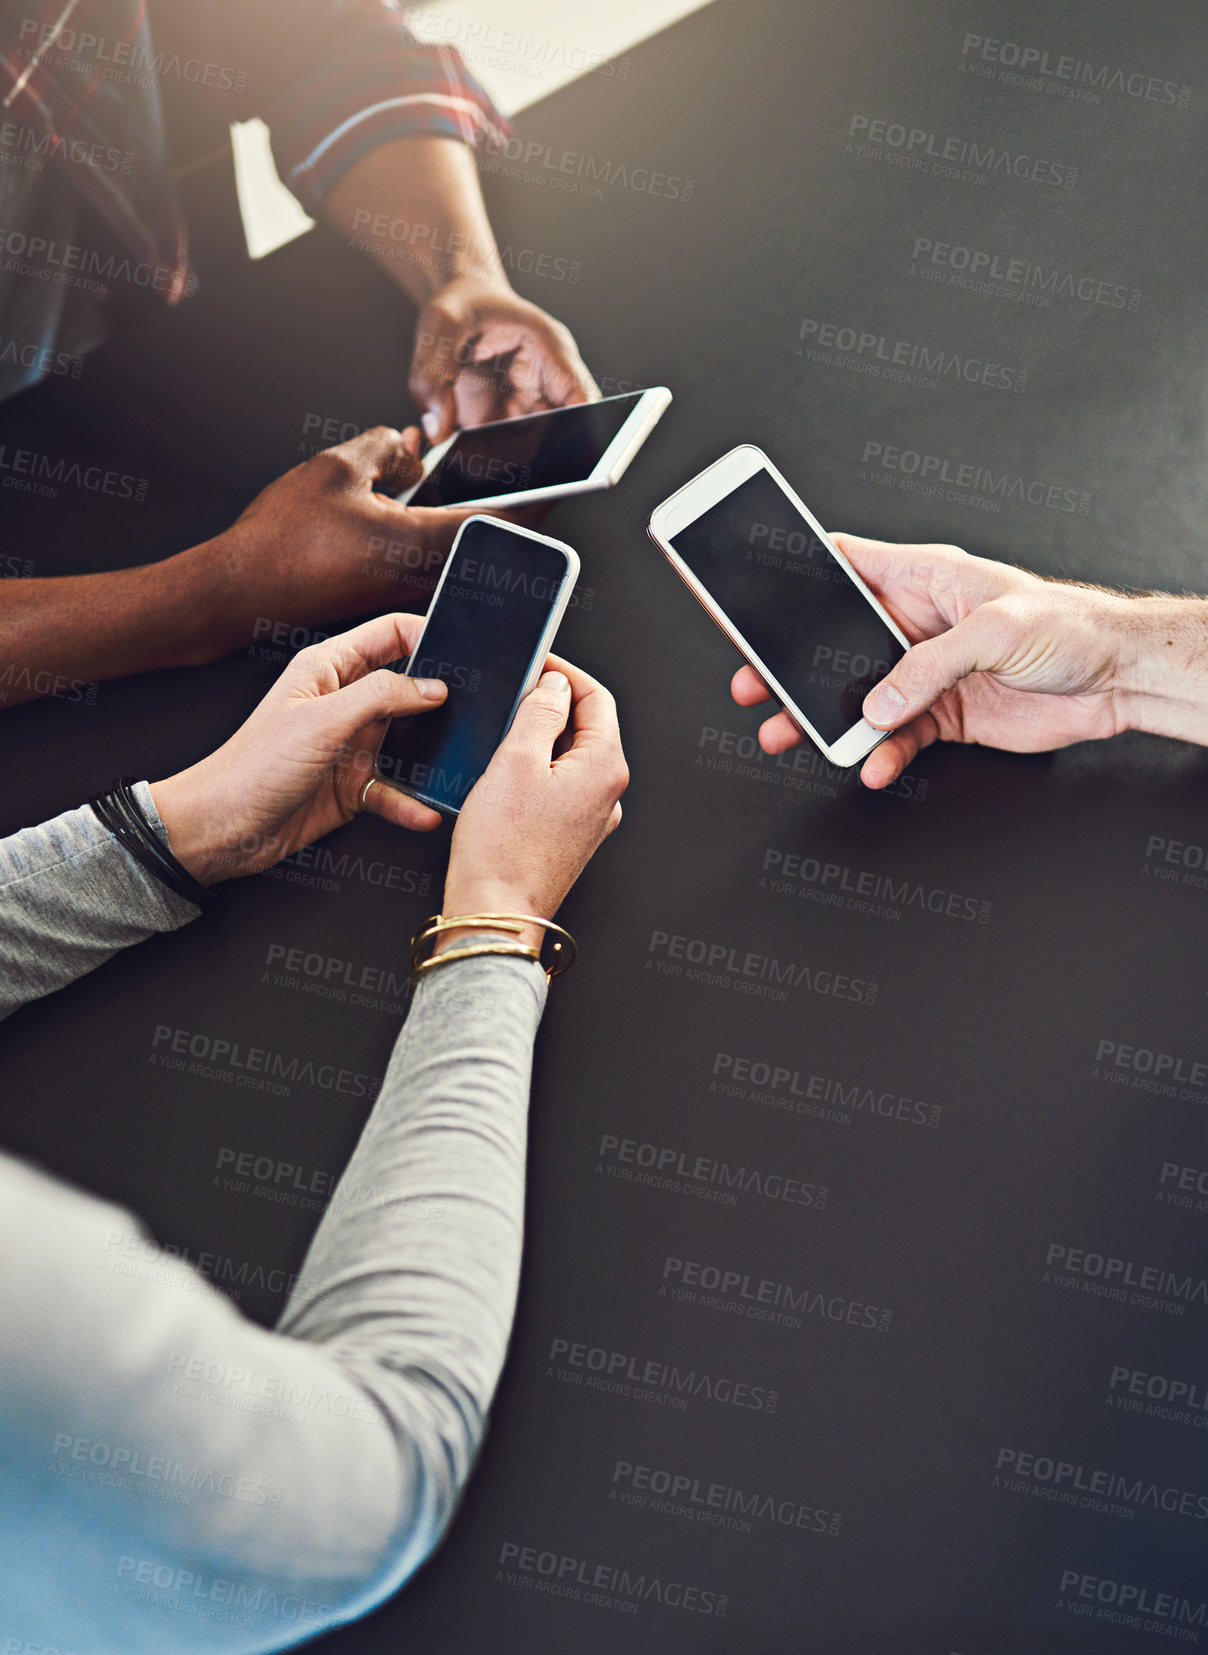 Buy stock photo Cropped shot of three people  sitting around a table together and using their cellphones